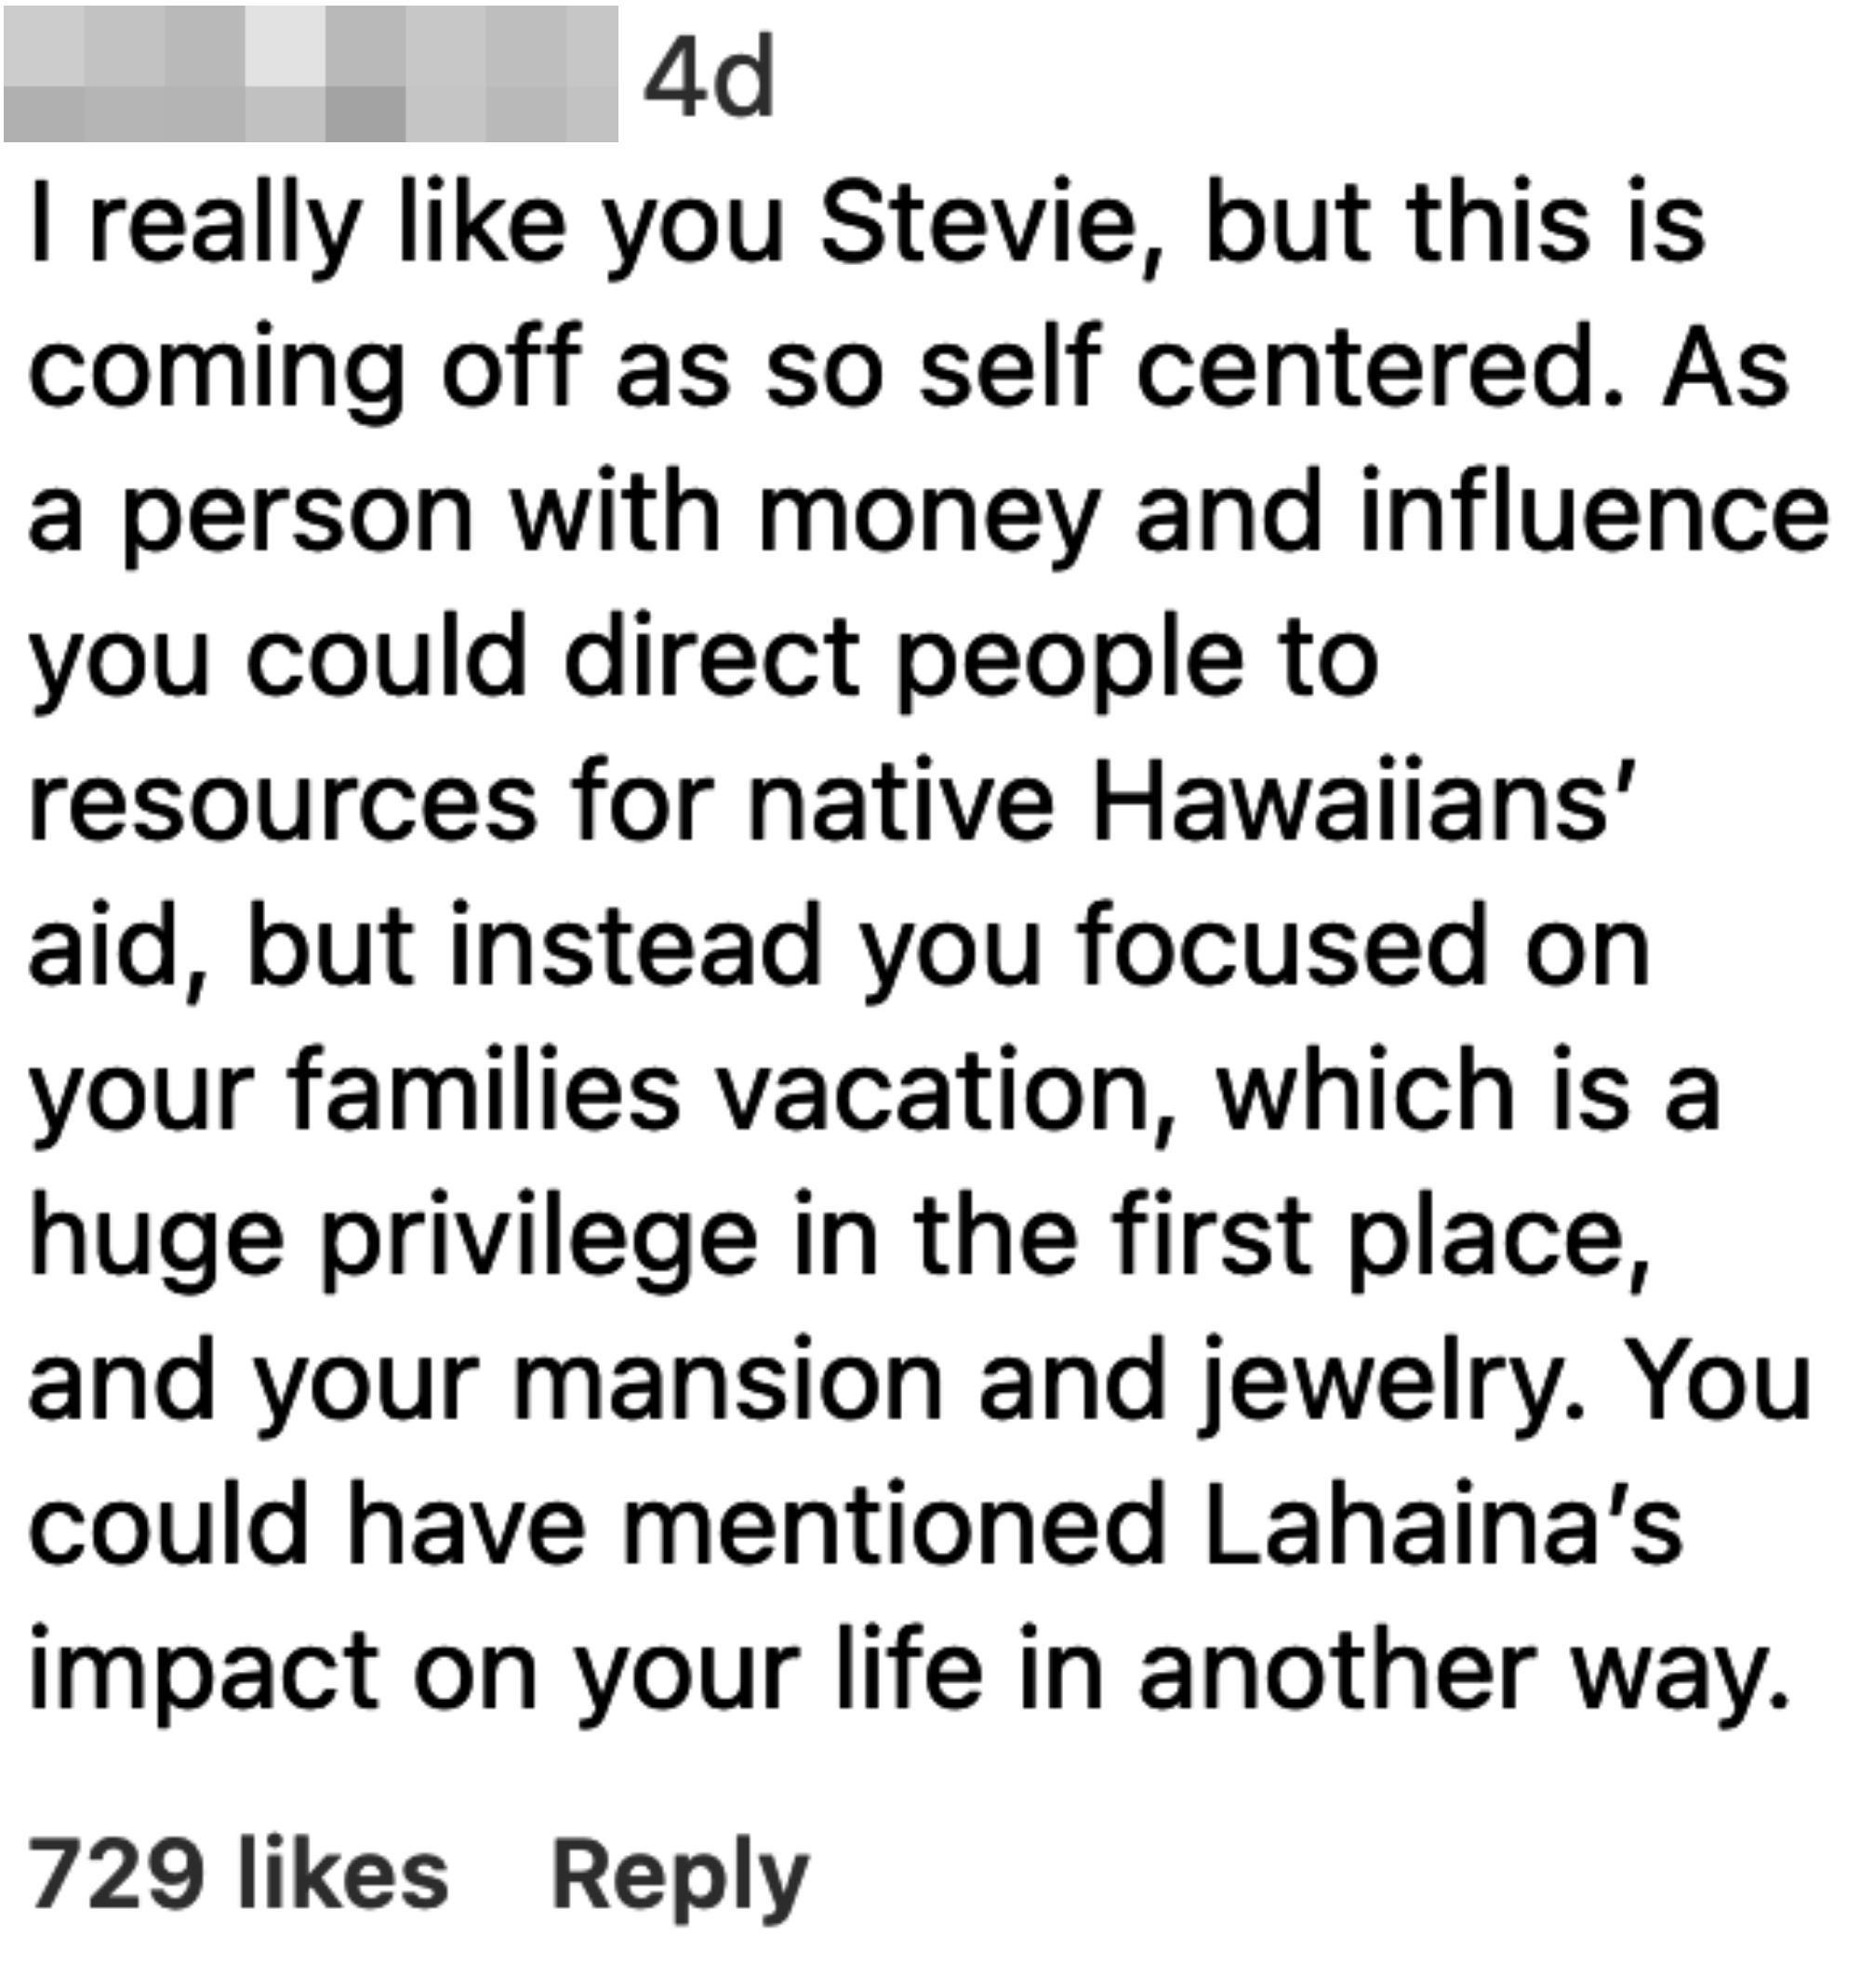 &quot;I really like you Stevie, but this is coming off as self centered; as a person with money and influence you could direct people to resources for native Hawaiians&#x27; aid, but instead you focused on your families vacation, which is a huge privilege&quot;